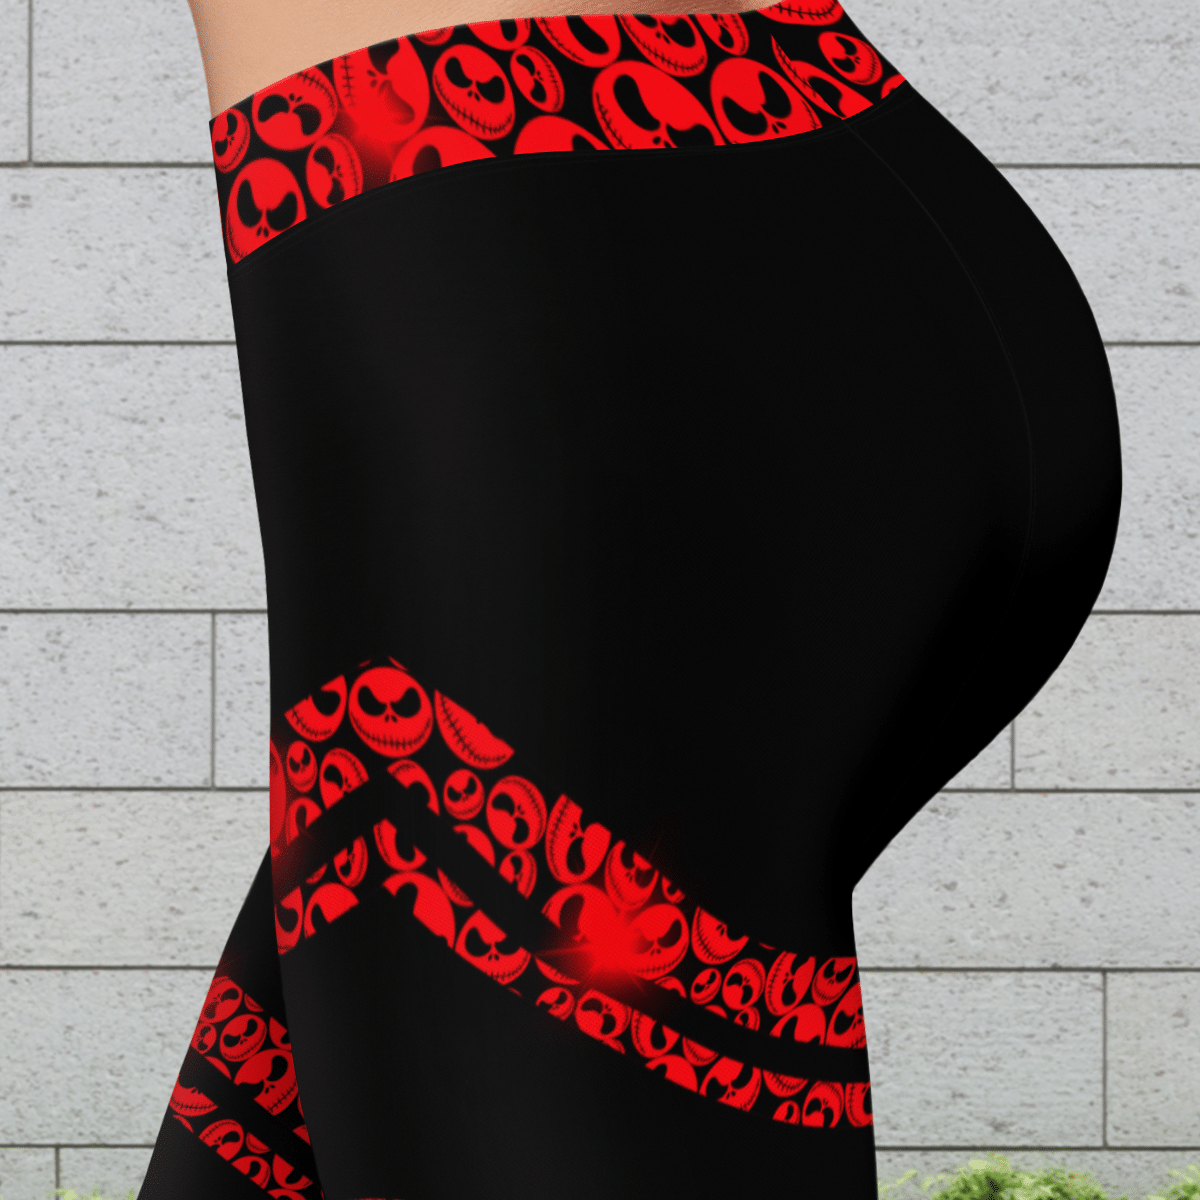 Red Fashion Hollow Out Tank Top & Leggings